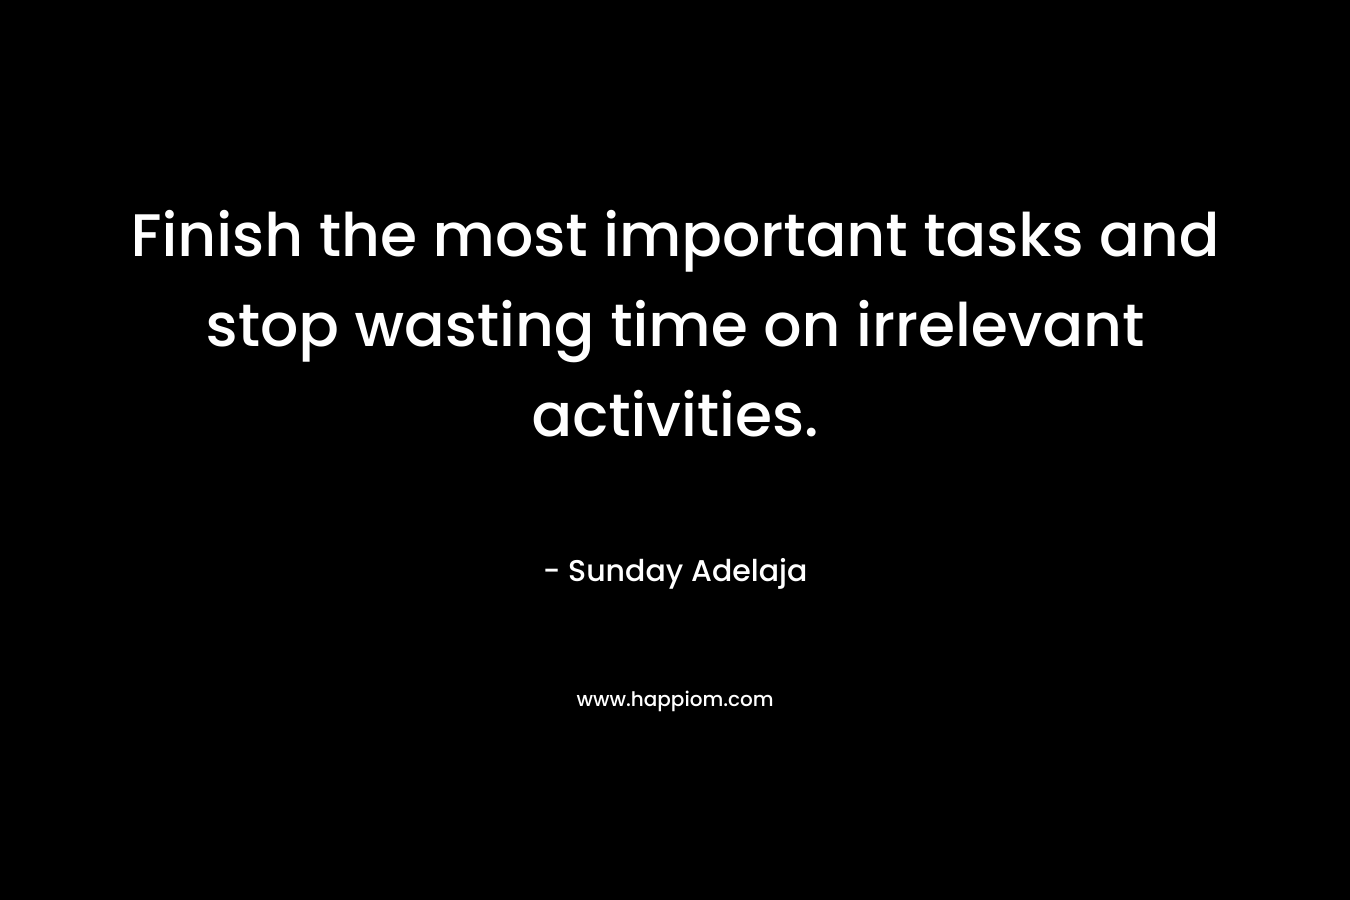 Finish the most important tasks and stop wasting time on irrelevant activities.